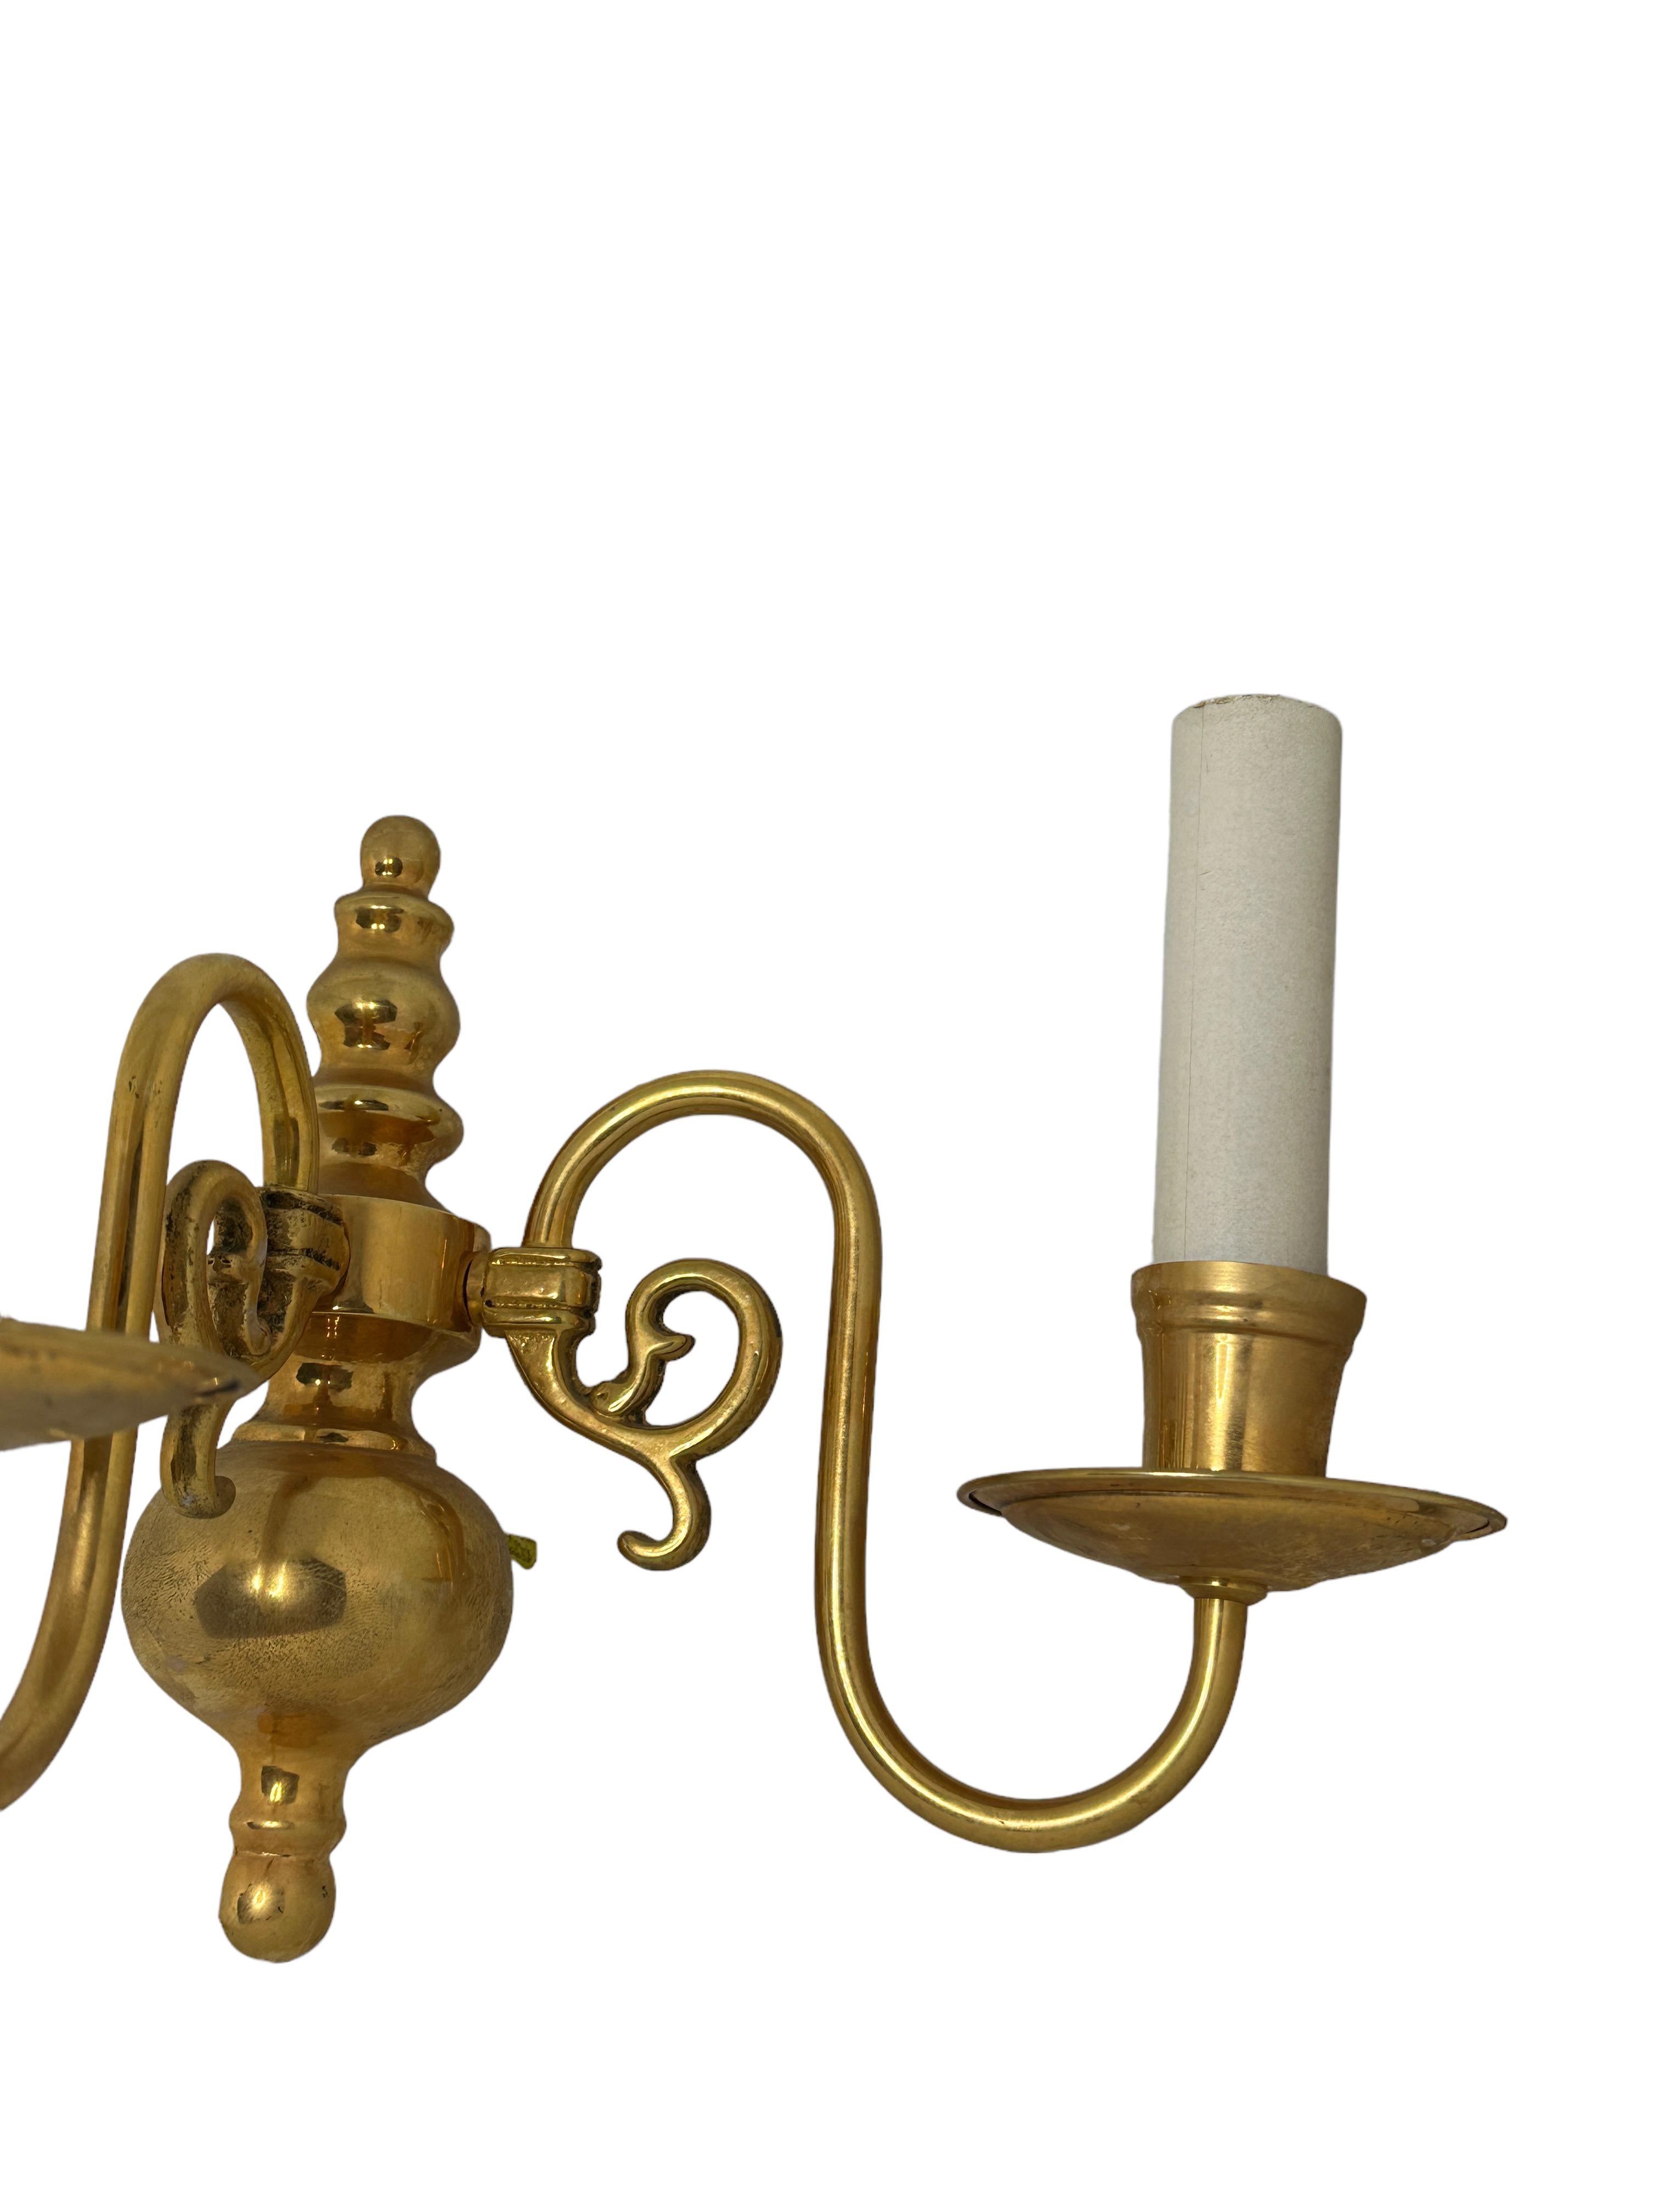 Pair of Solid Brass Two-Light Wall Sconces, Vintage, Austria, 1950s For Sale 1